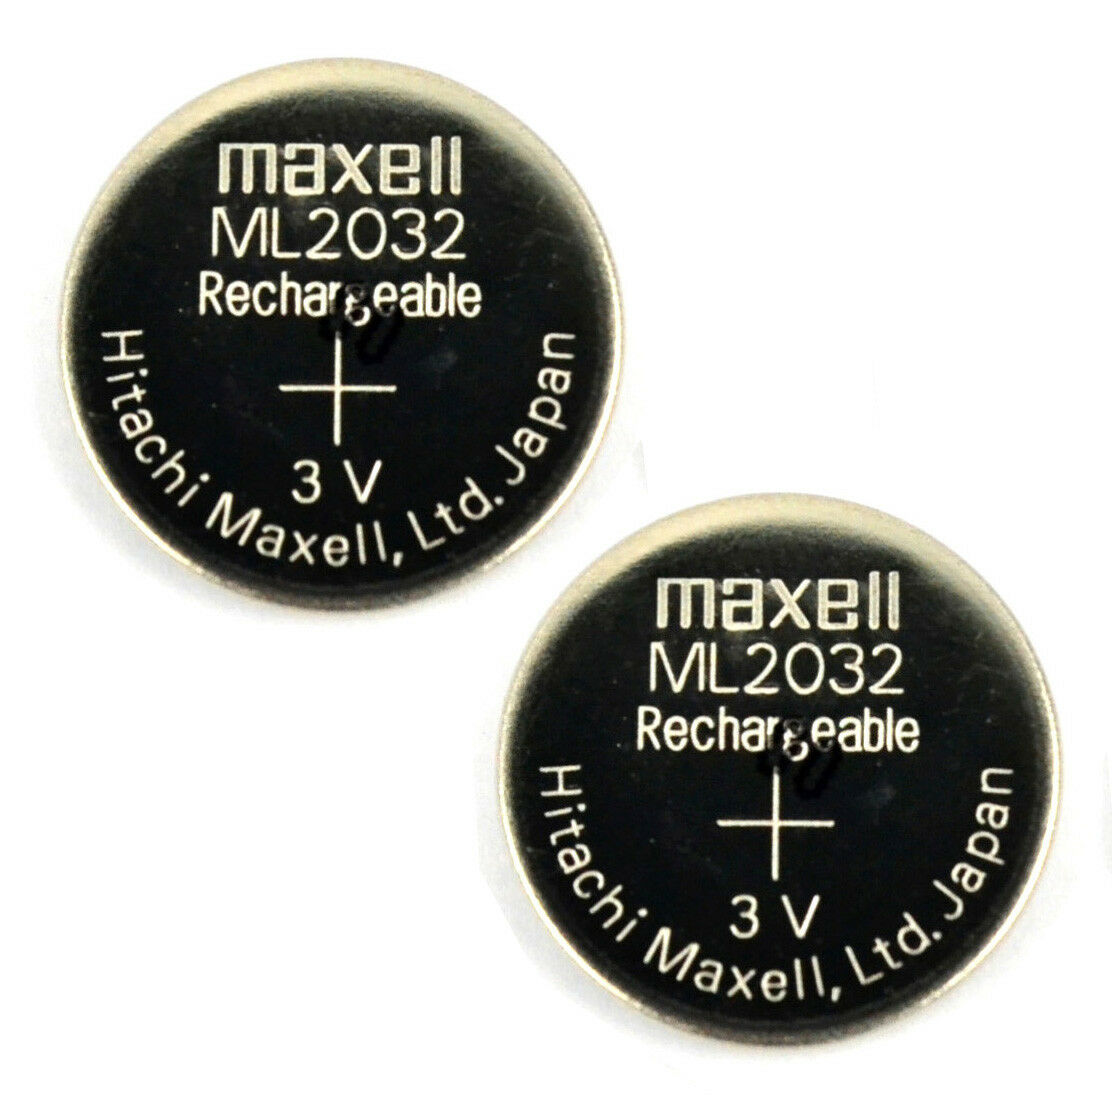 2 Pc Original Maxell Ml2032 2032 Rechargeable Lithium Coin Cell Battery 3v Japan